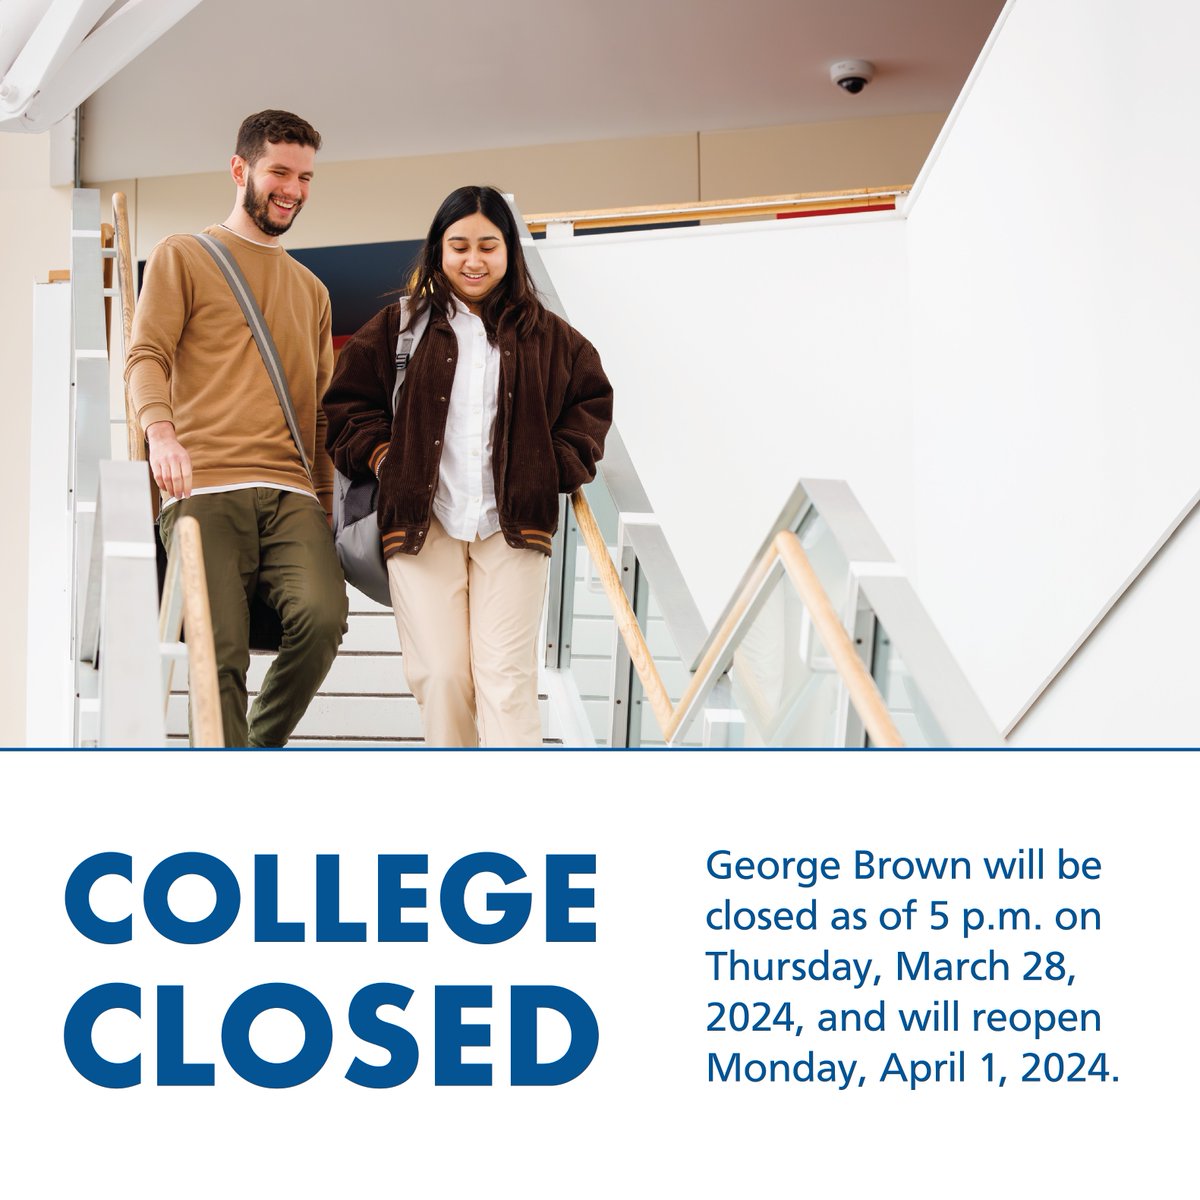 Long weekend ahead! George Brown College will be closed as of 5:00PM today and will reopen on Monday, April 1, 2024. Take this time to recharge and spend some quality time with your friends and loved ones. See you back on Monday!